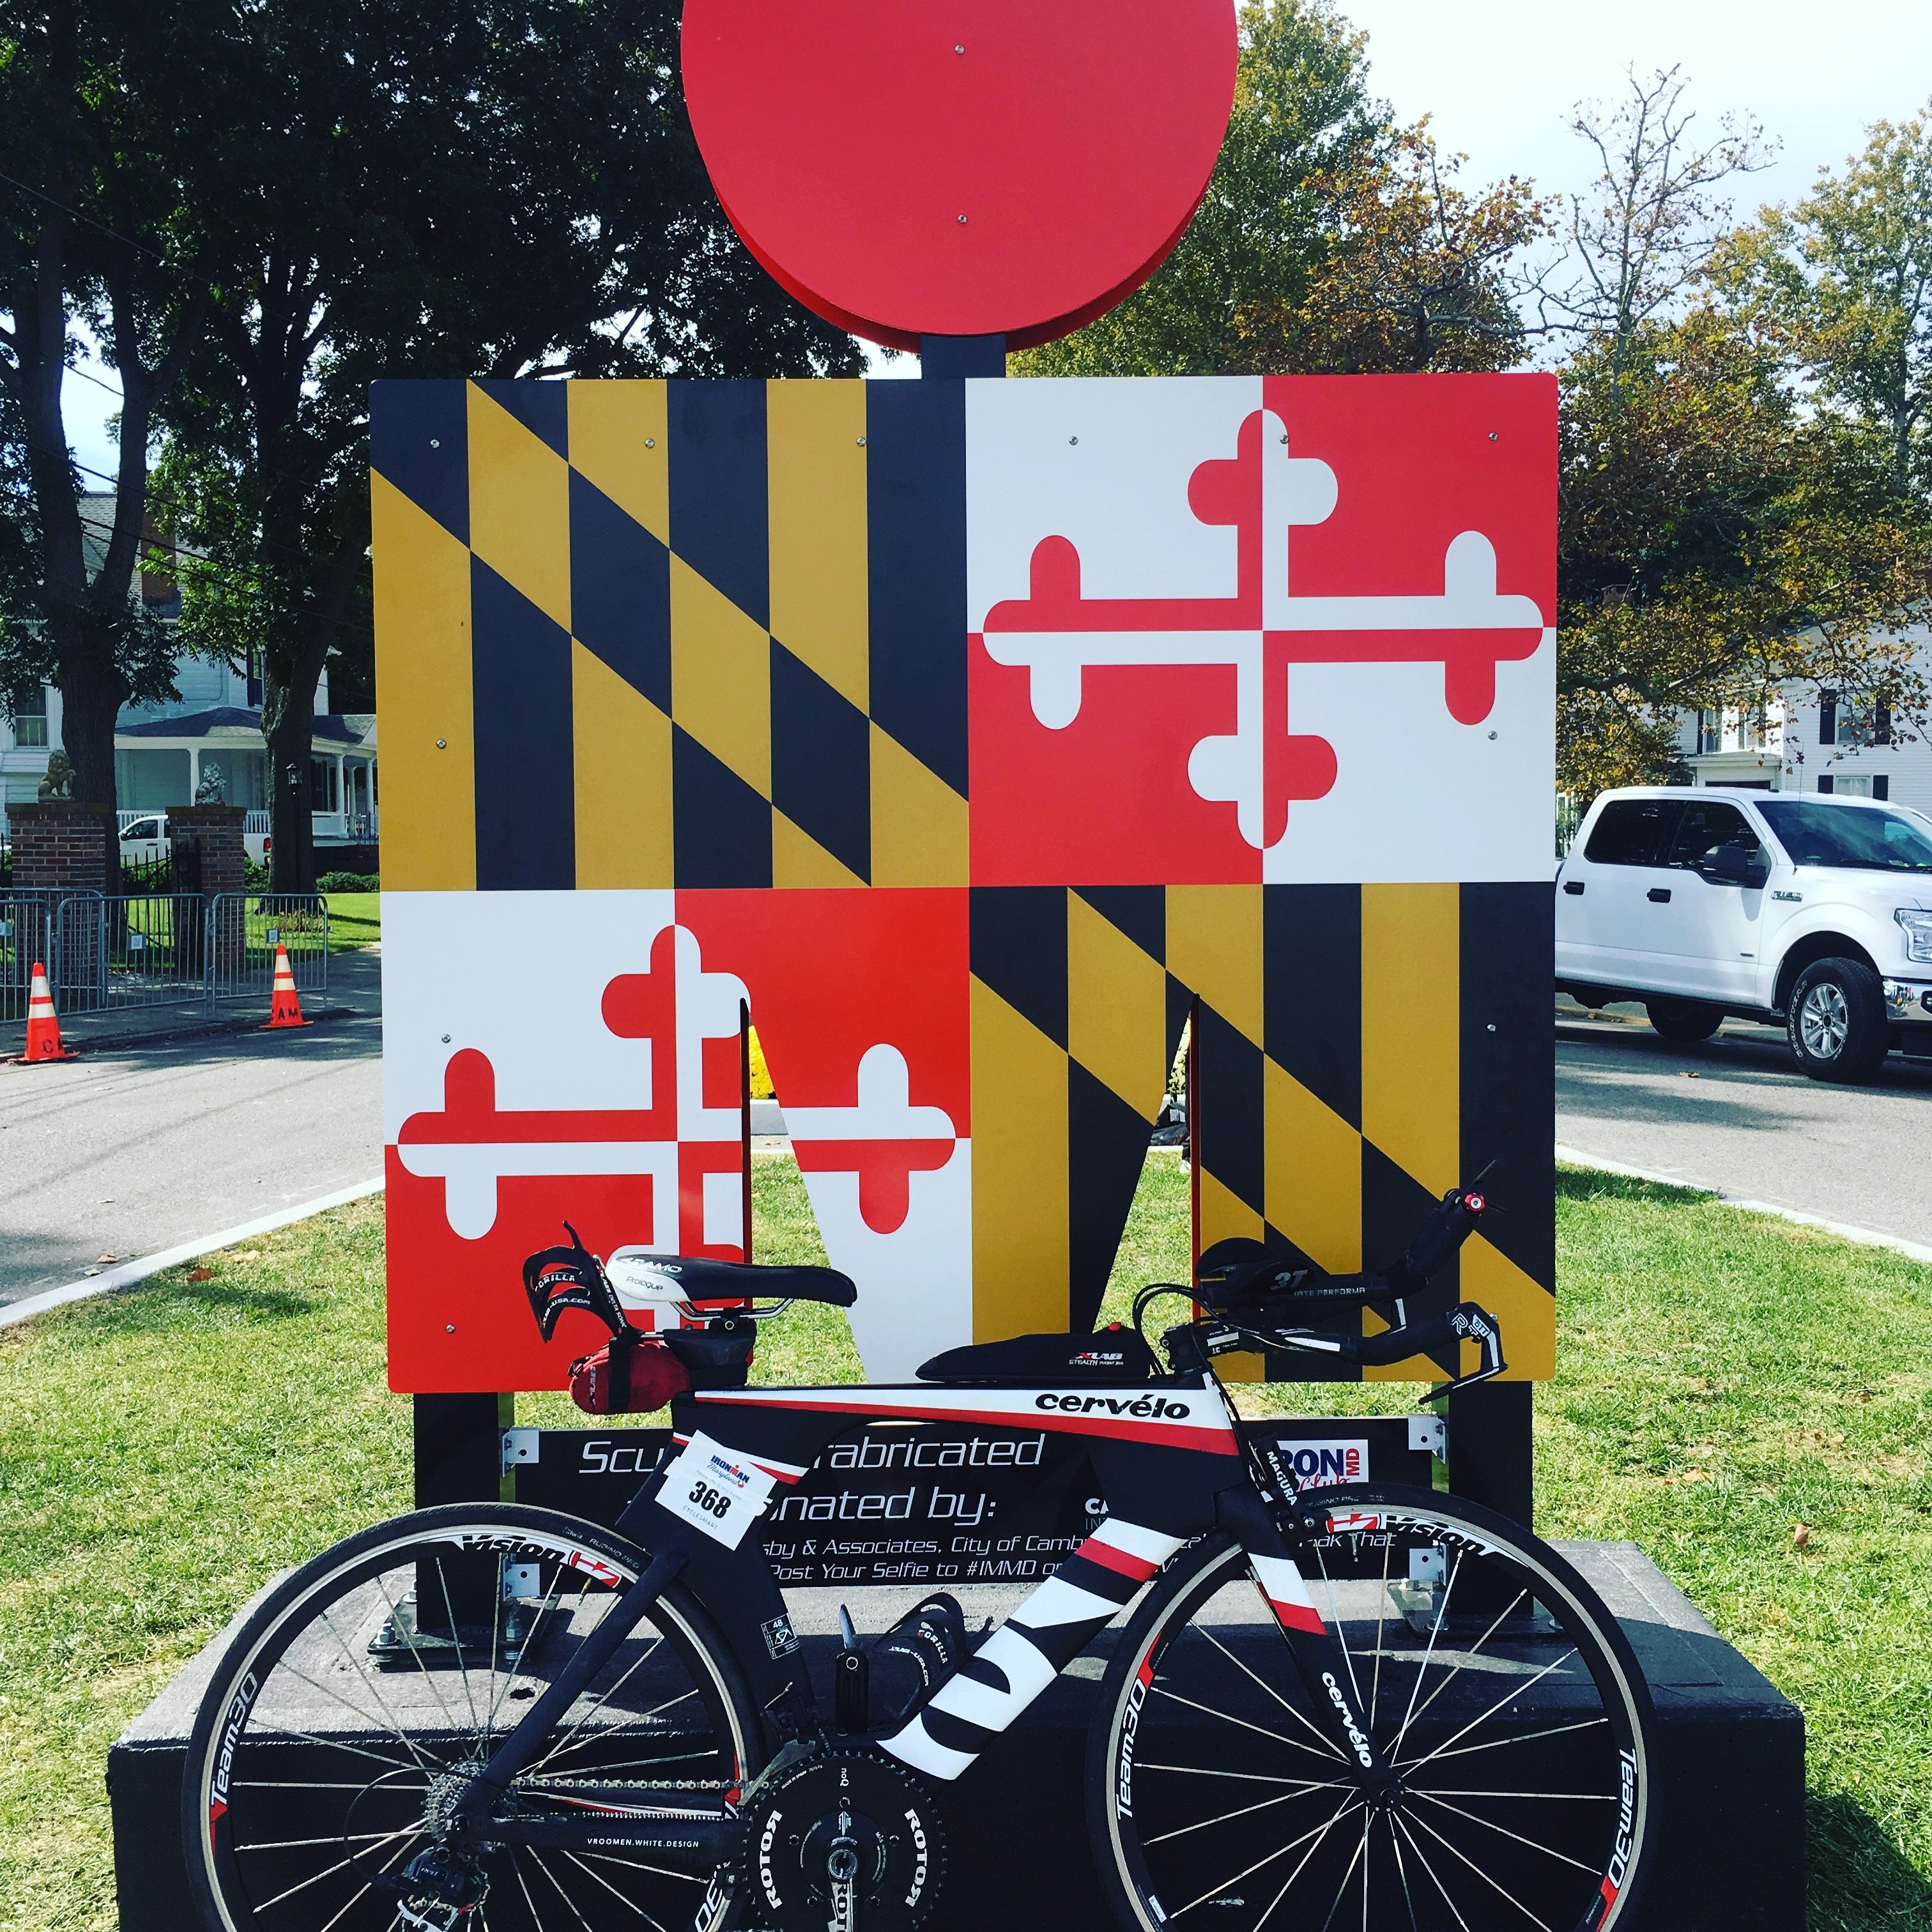 racing bicycle before a Maryland state flag